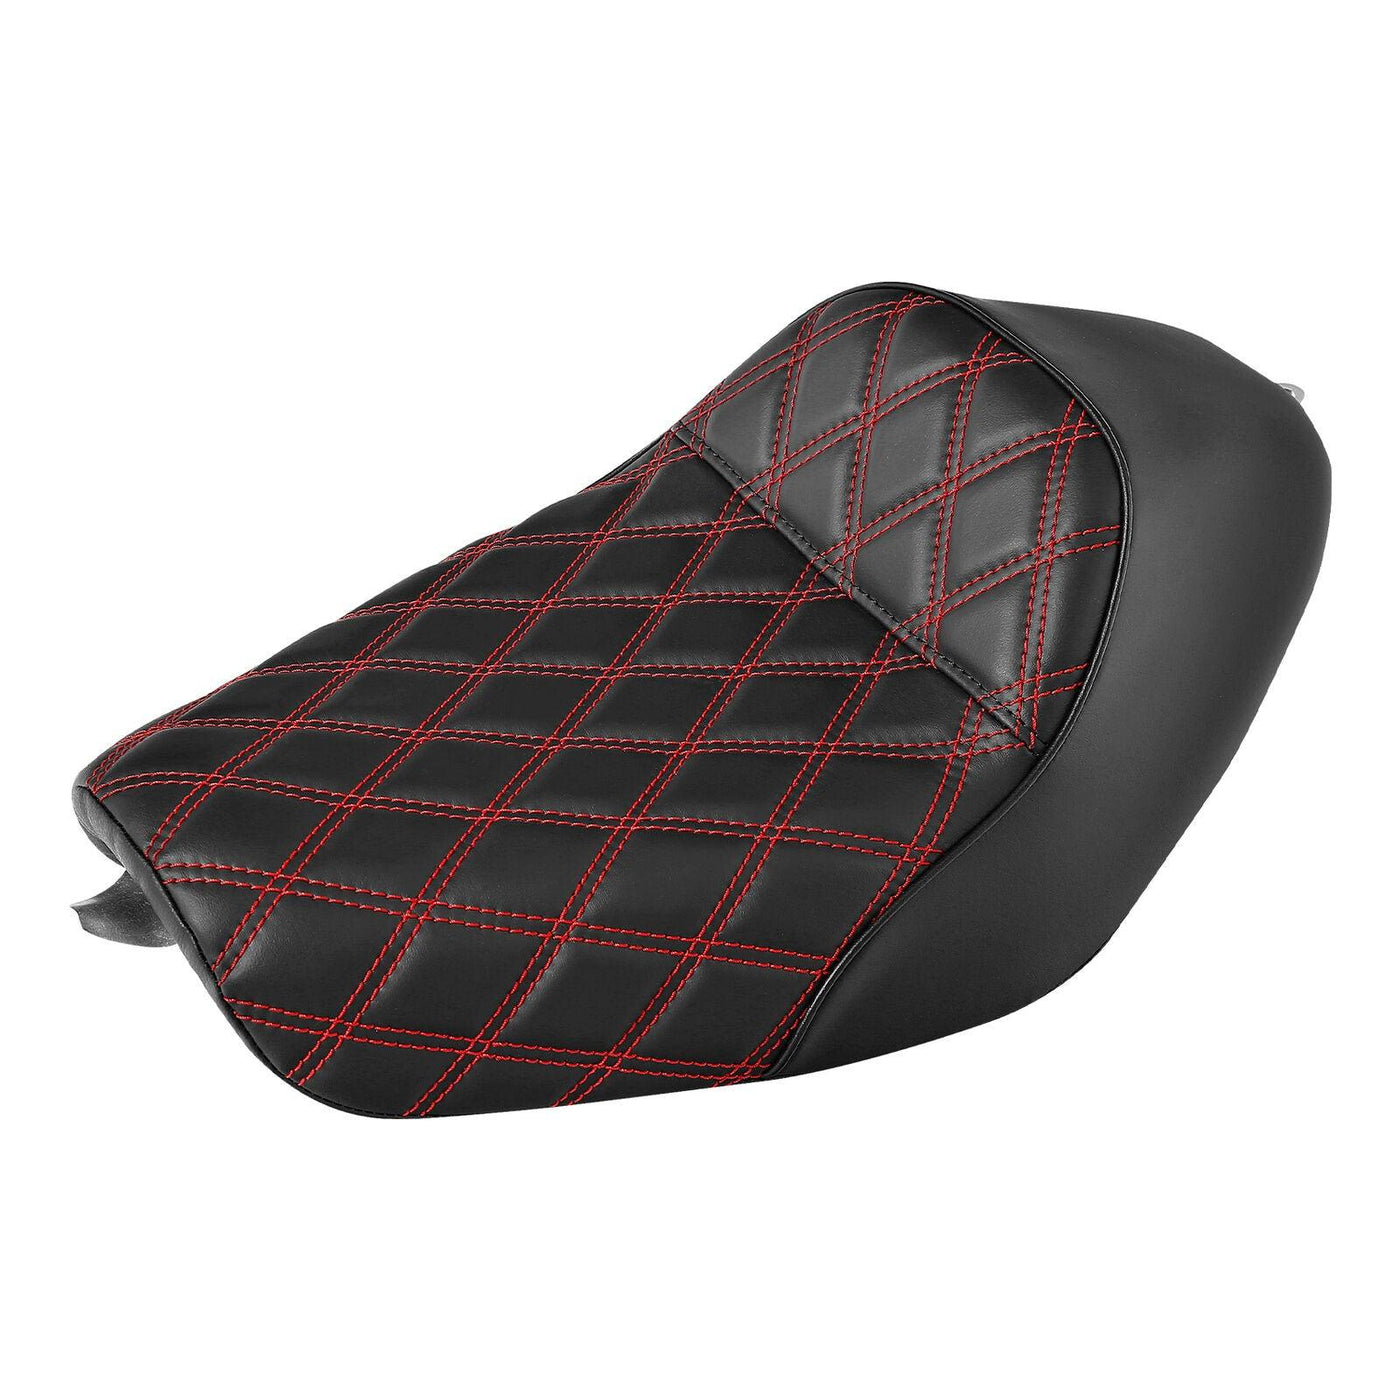 Driver Solo Seat Cushion Fit For Harley Sportster Iron XL883 XL1200 2010-2021 20 - Moto Life Products